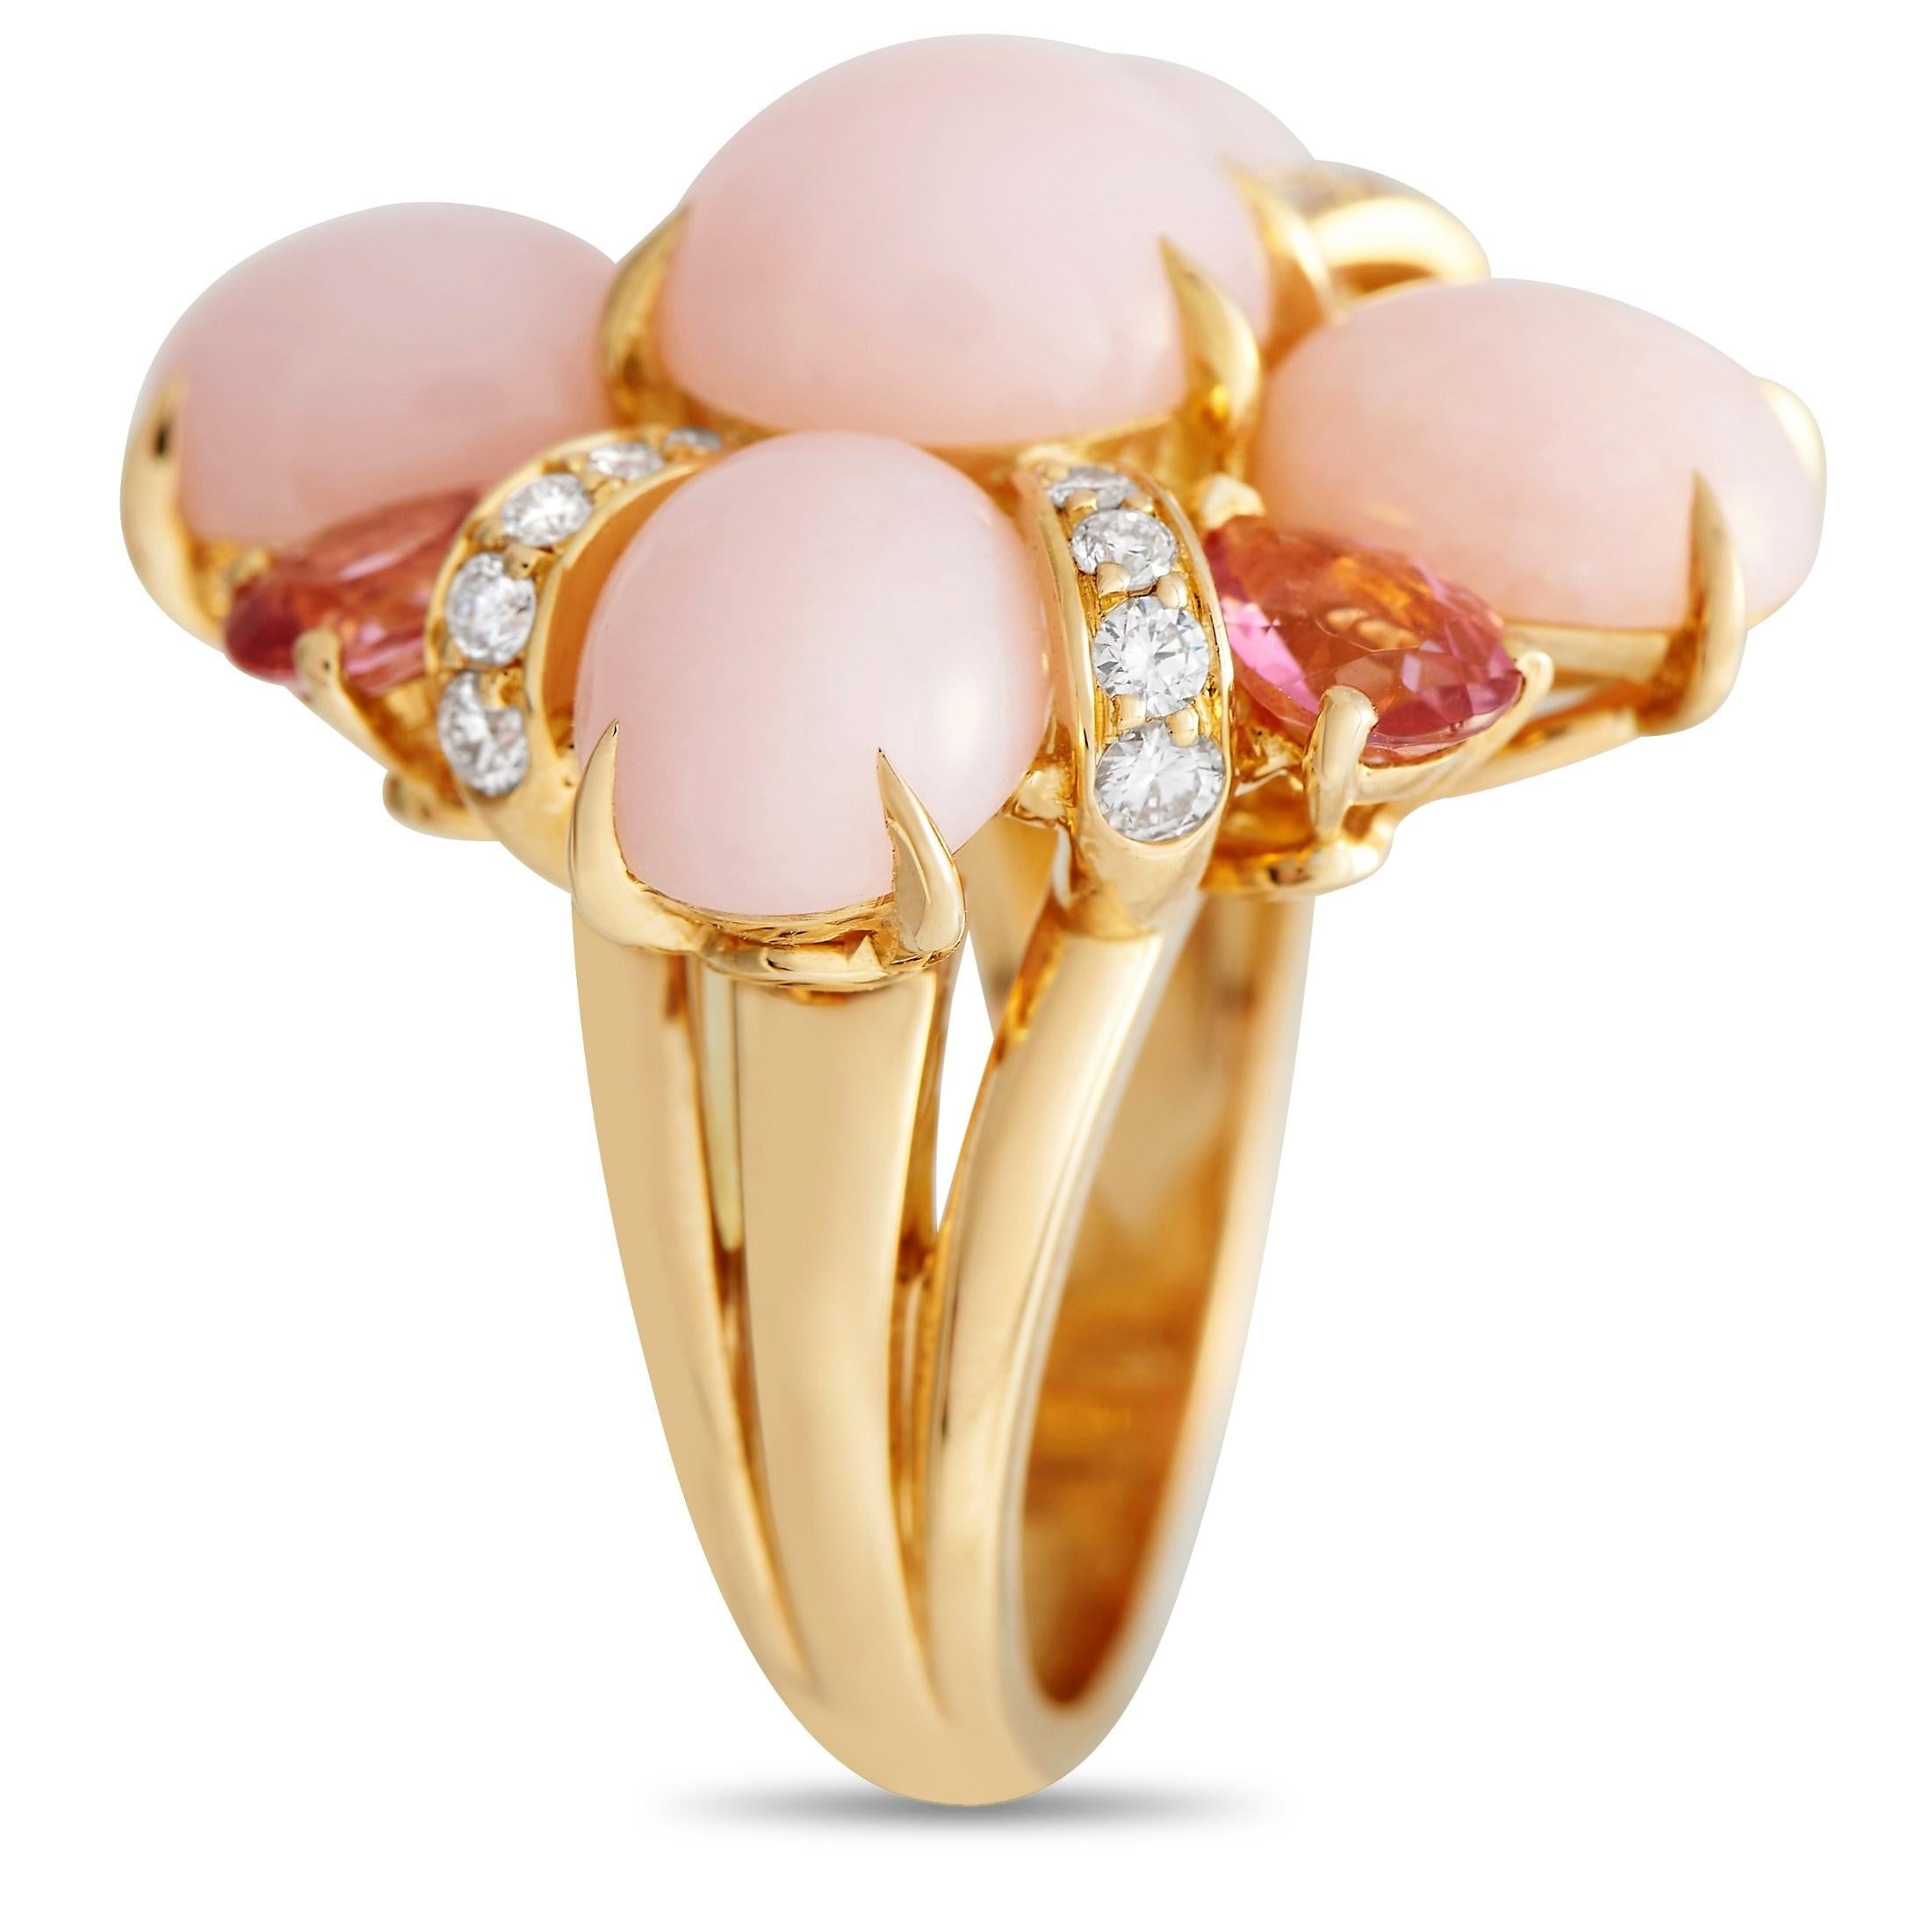 Bold and ornate yet sophisticatedly demure is this Chanel Baroque 18K Yellow Gold Diamond Multi-Stone Cocktail Ring. It features a 5mm band holding a floral motif centerpiece composed of pink opal and pink tourmaline on claw prongs. Yellow gold